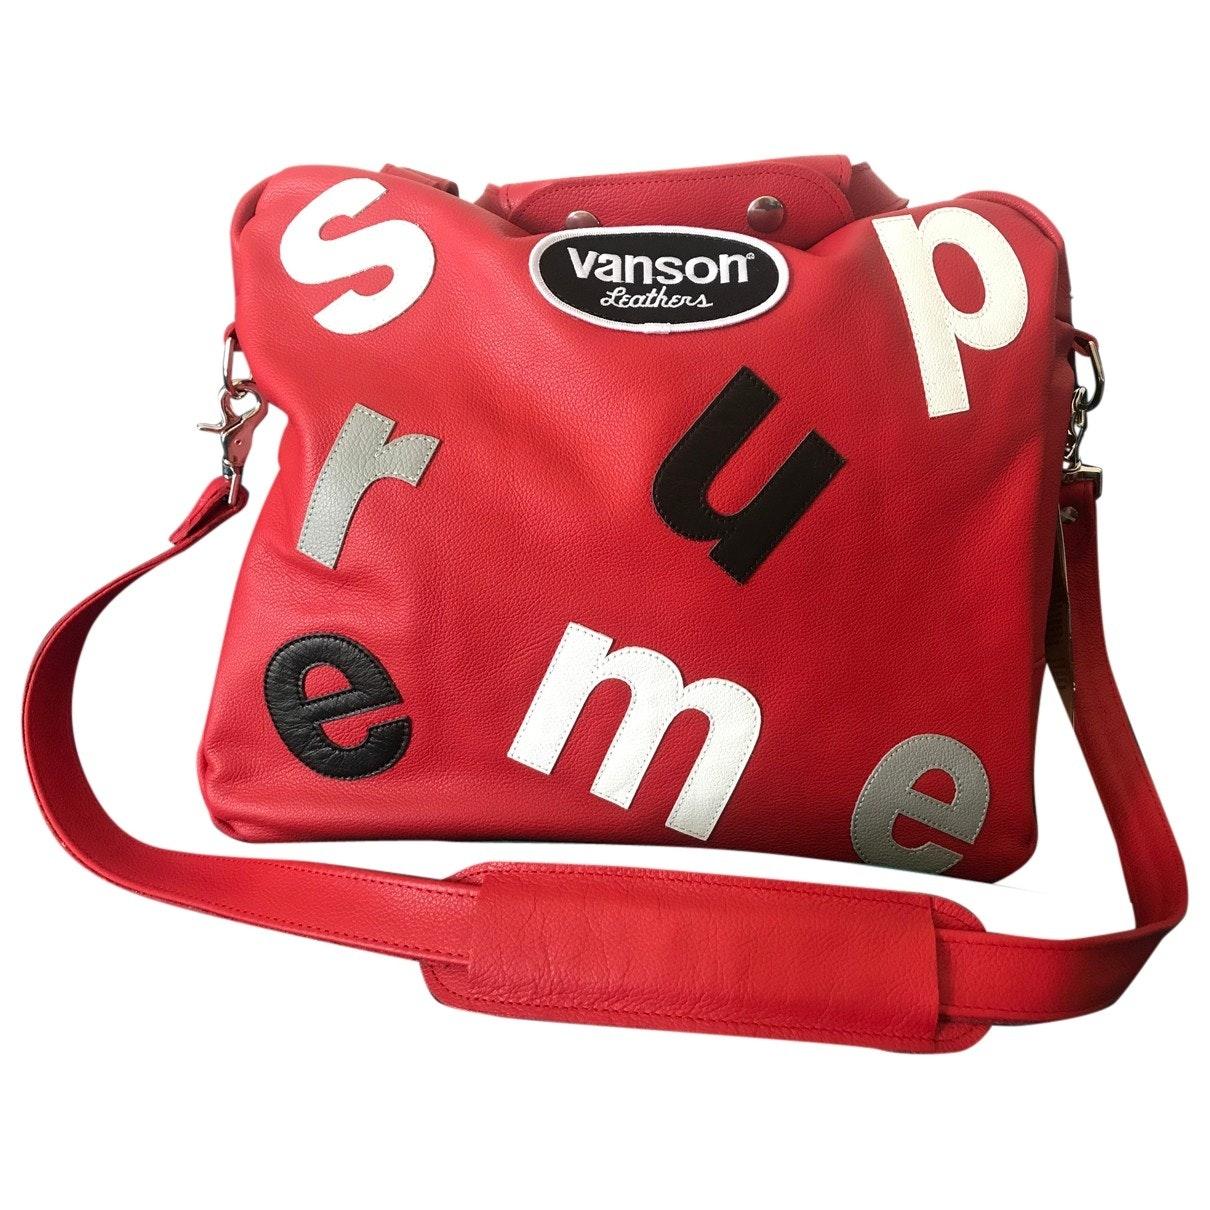 Supreme Leather Bag in Red for Men - Lyst